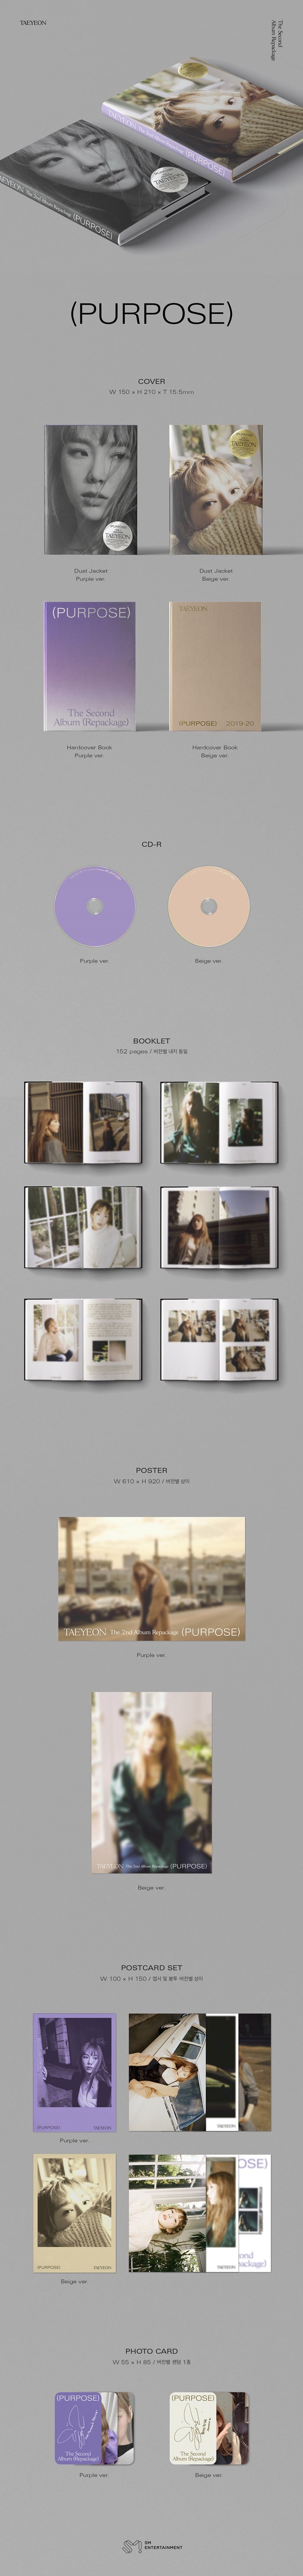 1 CD
1 Booklet (152 pages)
1 Postcard Set
1 Photo Card